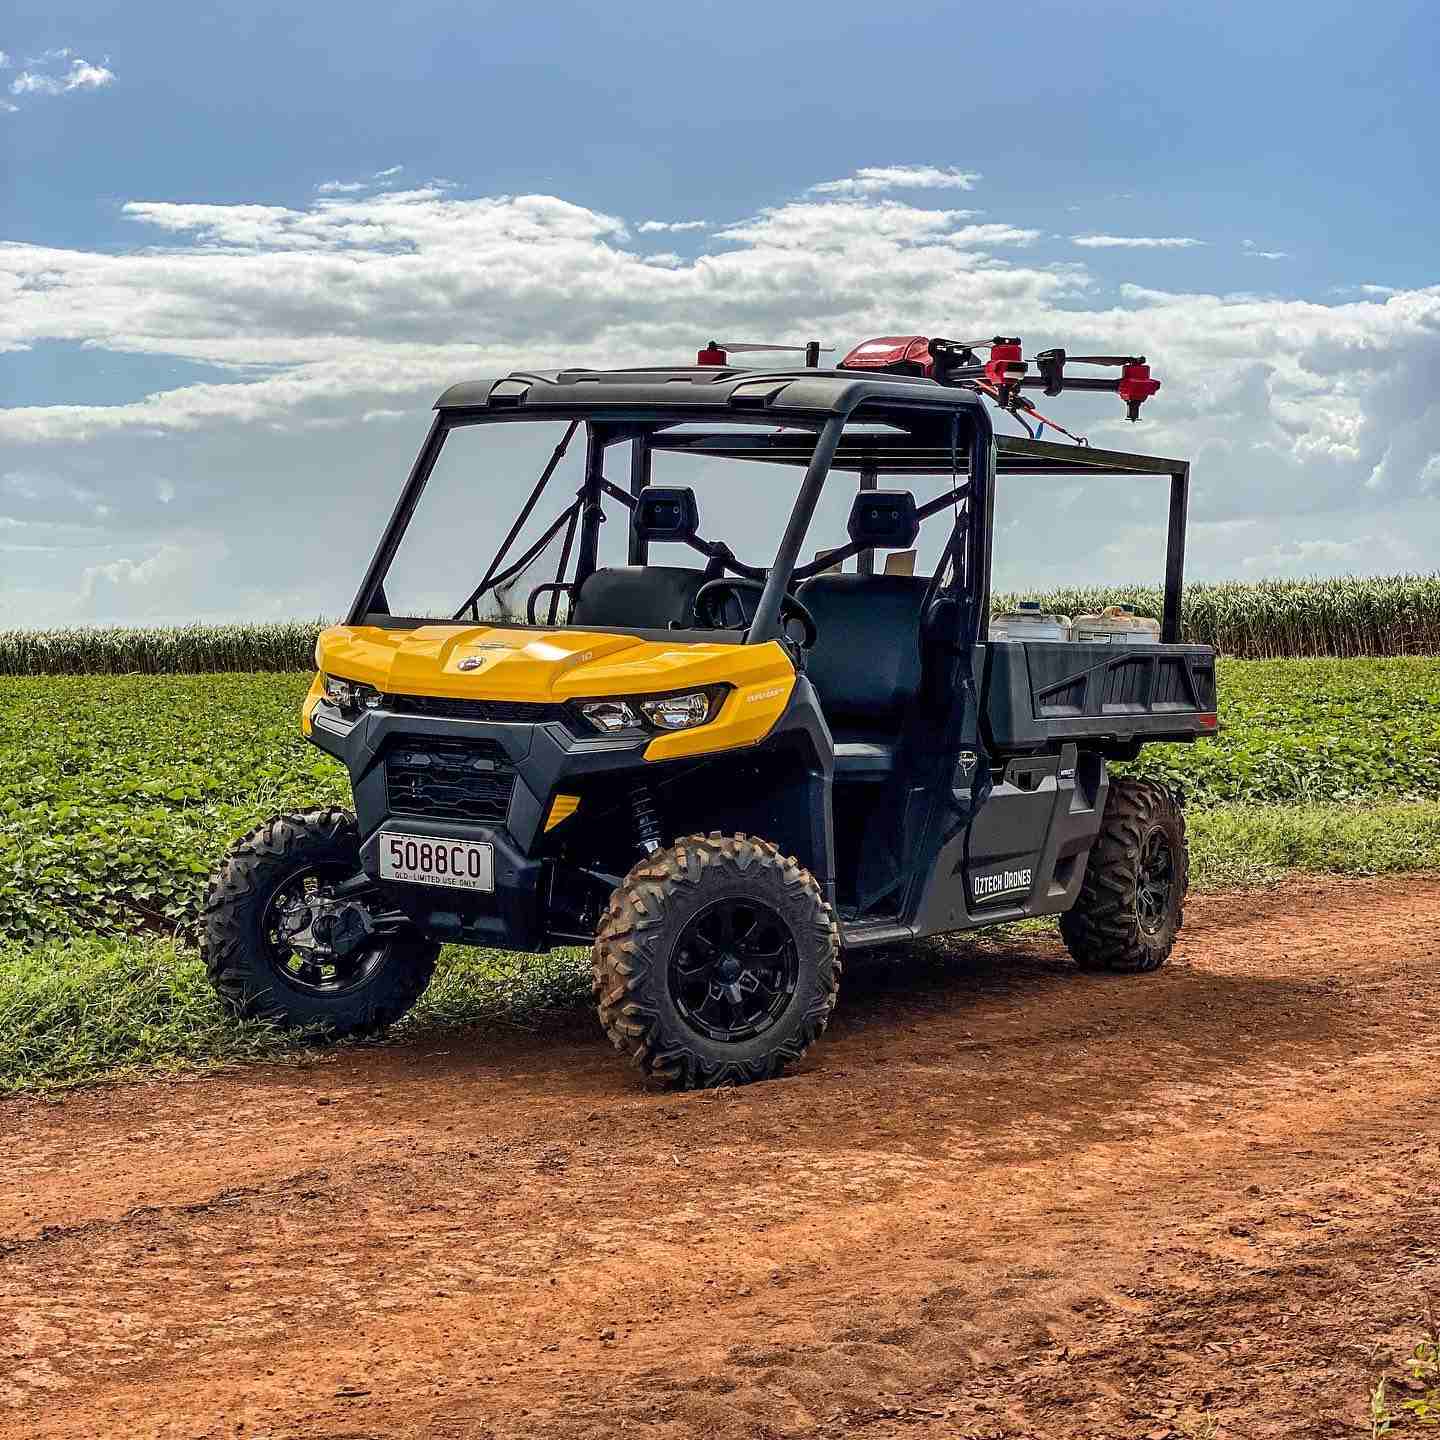 Queensland farmers were equipped with this new combo of a ground unit fitted out boom sprays and a spot spraying drone on top, which has been put straight to work last month.